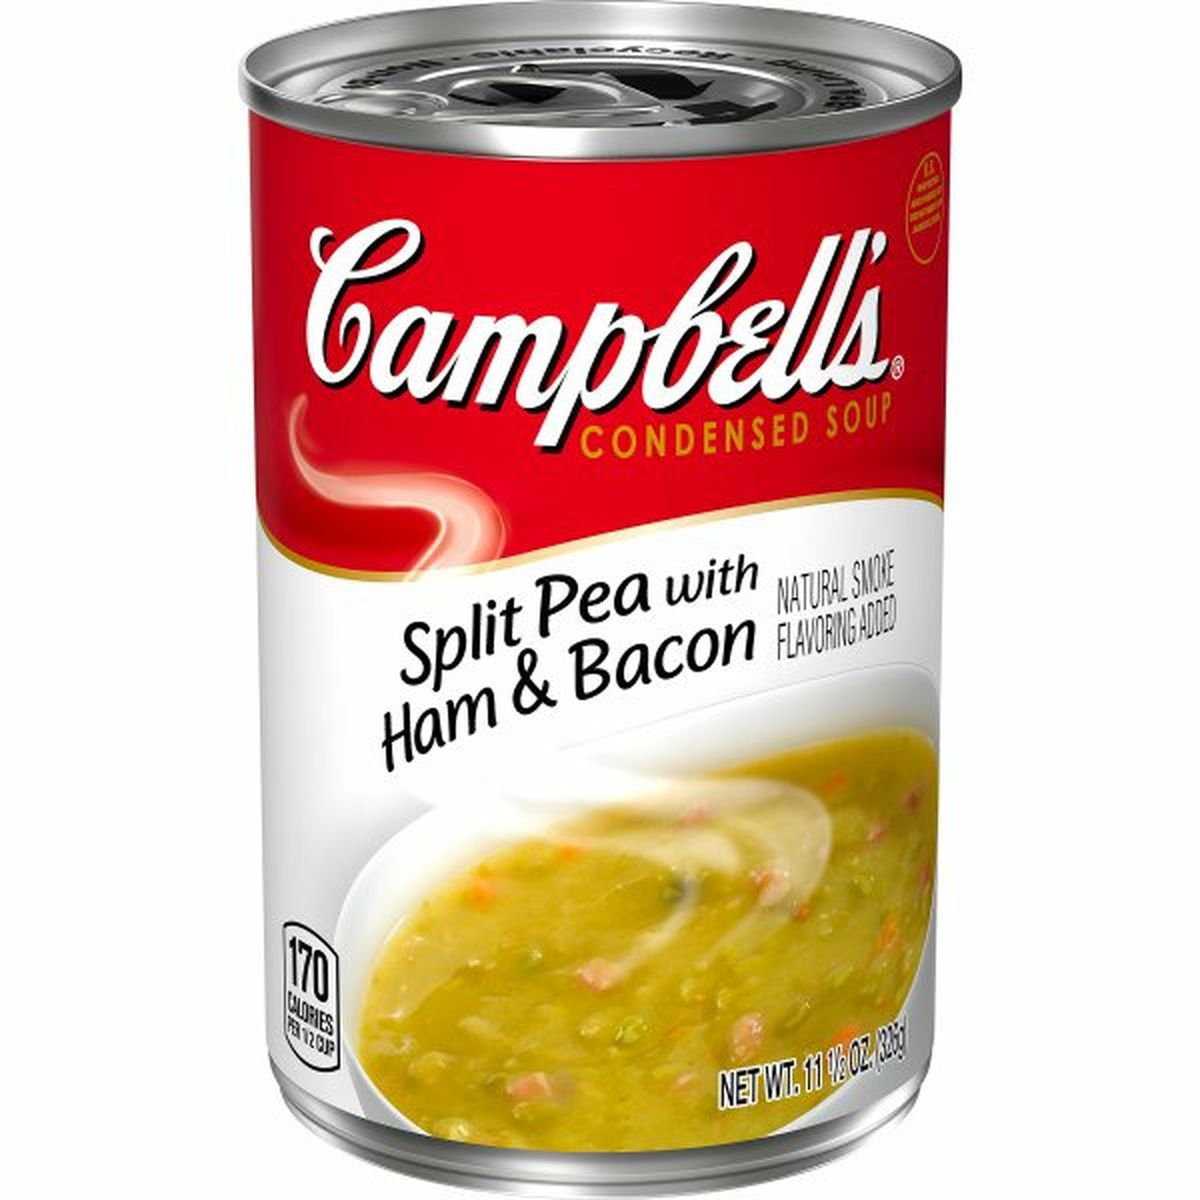 Calories in Campbell'ss Condensed Split Pea with Ham Soup